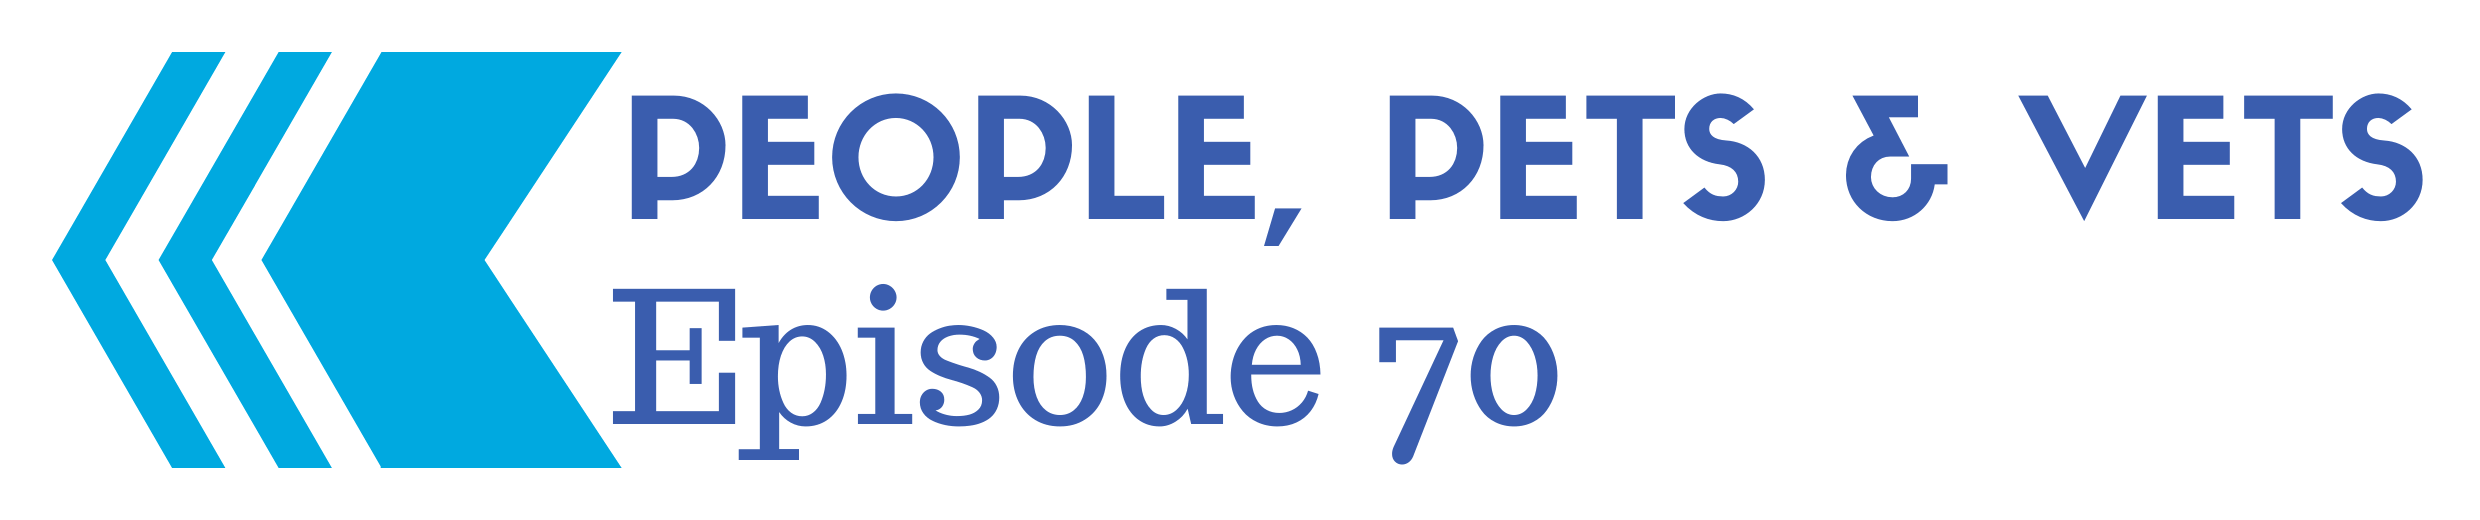 Back to Episode 70